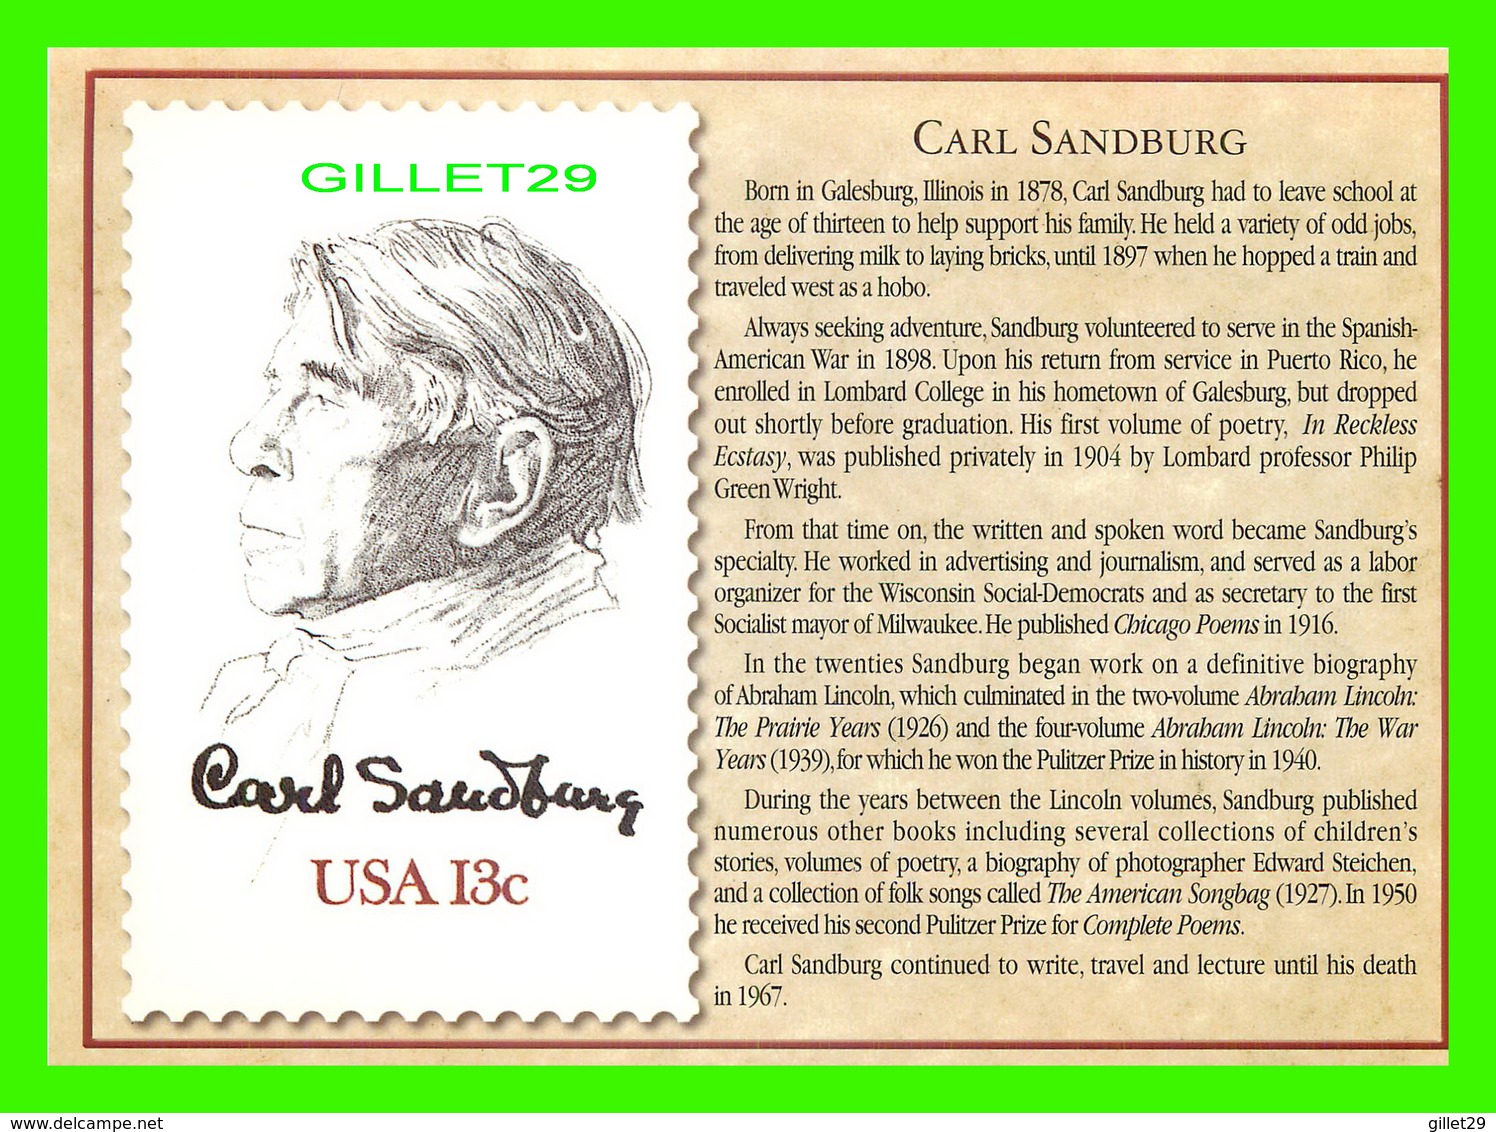 TIMBRES REPRÉSENTATIOINS - GREAT AMERICAN WRITERS, CARL SANDBURG (1878-1967) - STAMP ISSUE DATE,1978 - Timbres (représentations)